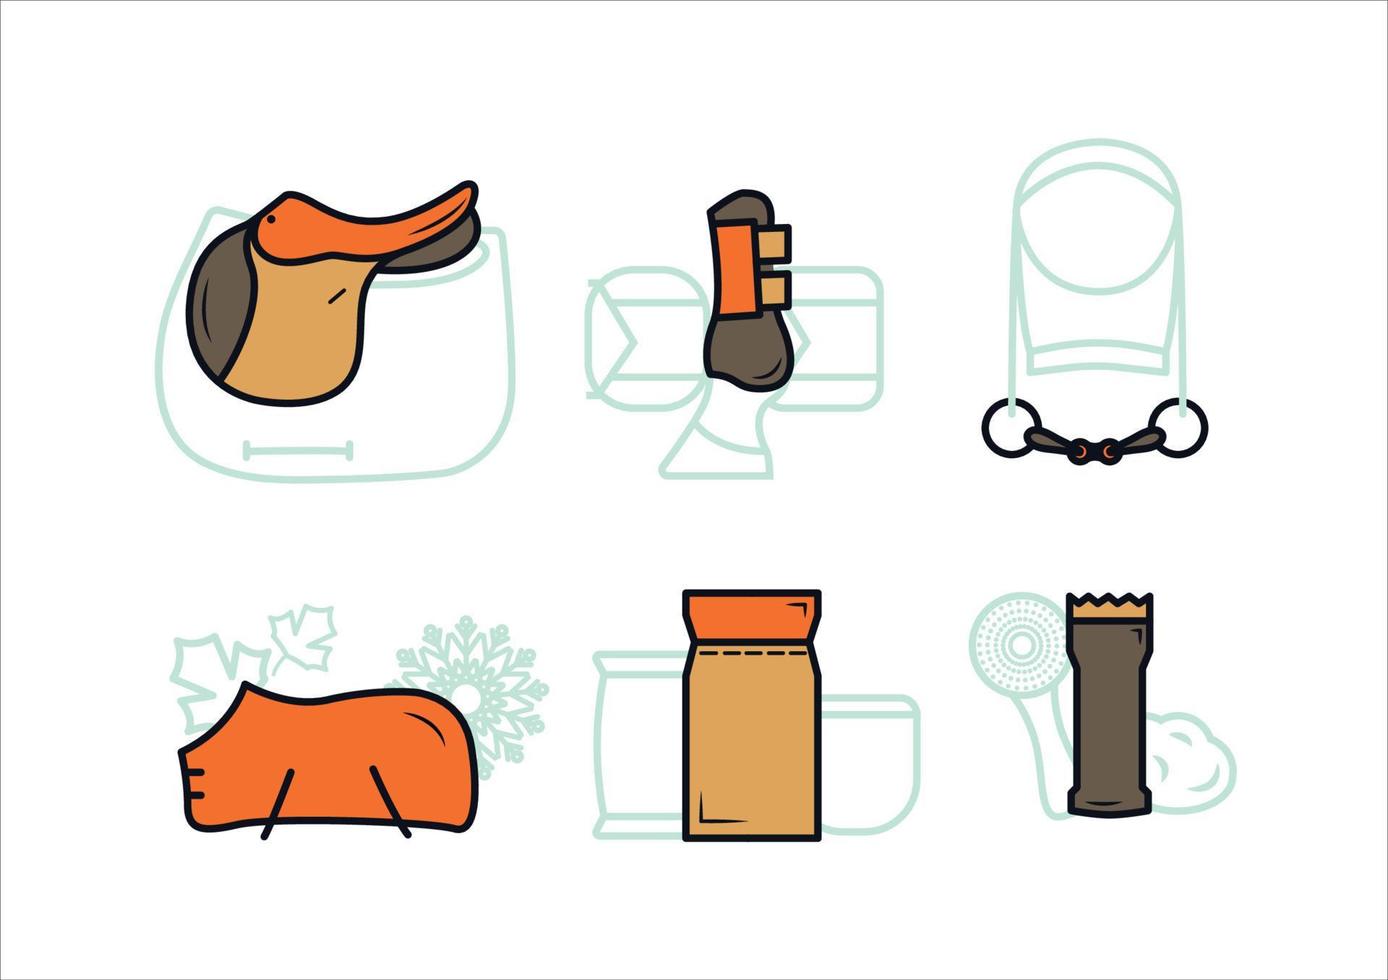 Horse equipment icons. Horse equipment icons. Set of colored icons icons for horse care. Saddle, nails, protection for legs, fishing rod, blanket feed, grooming machine vector